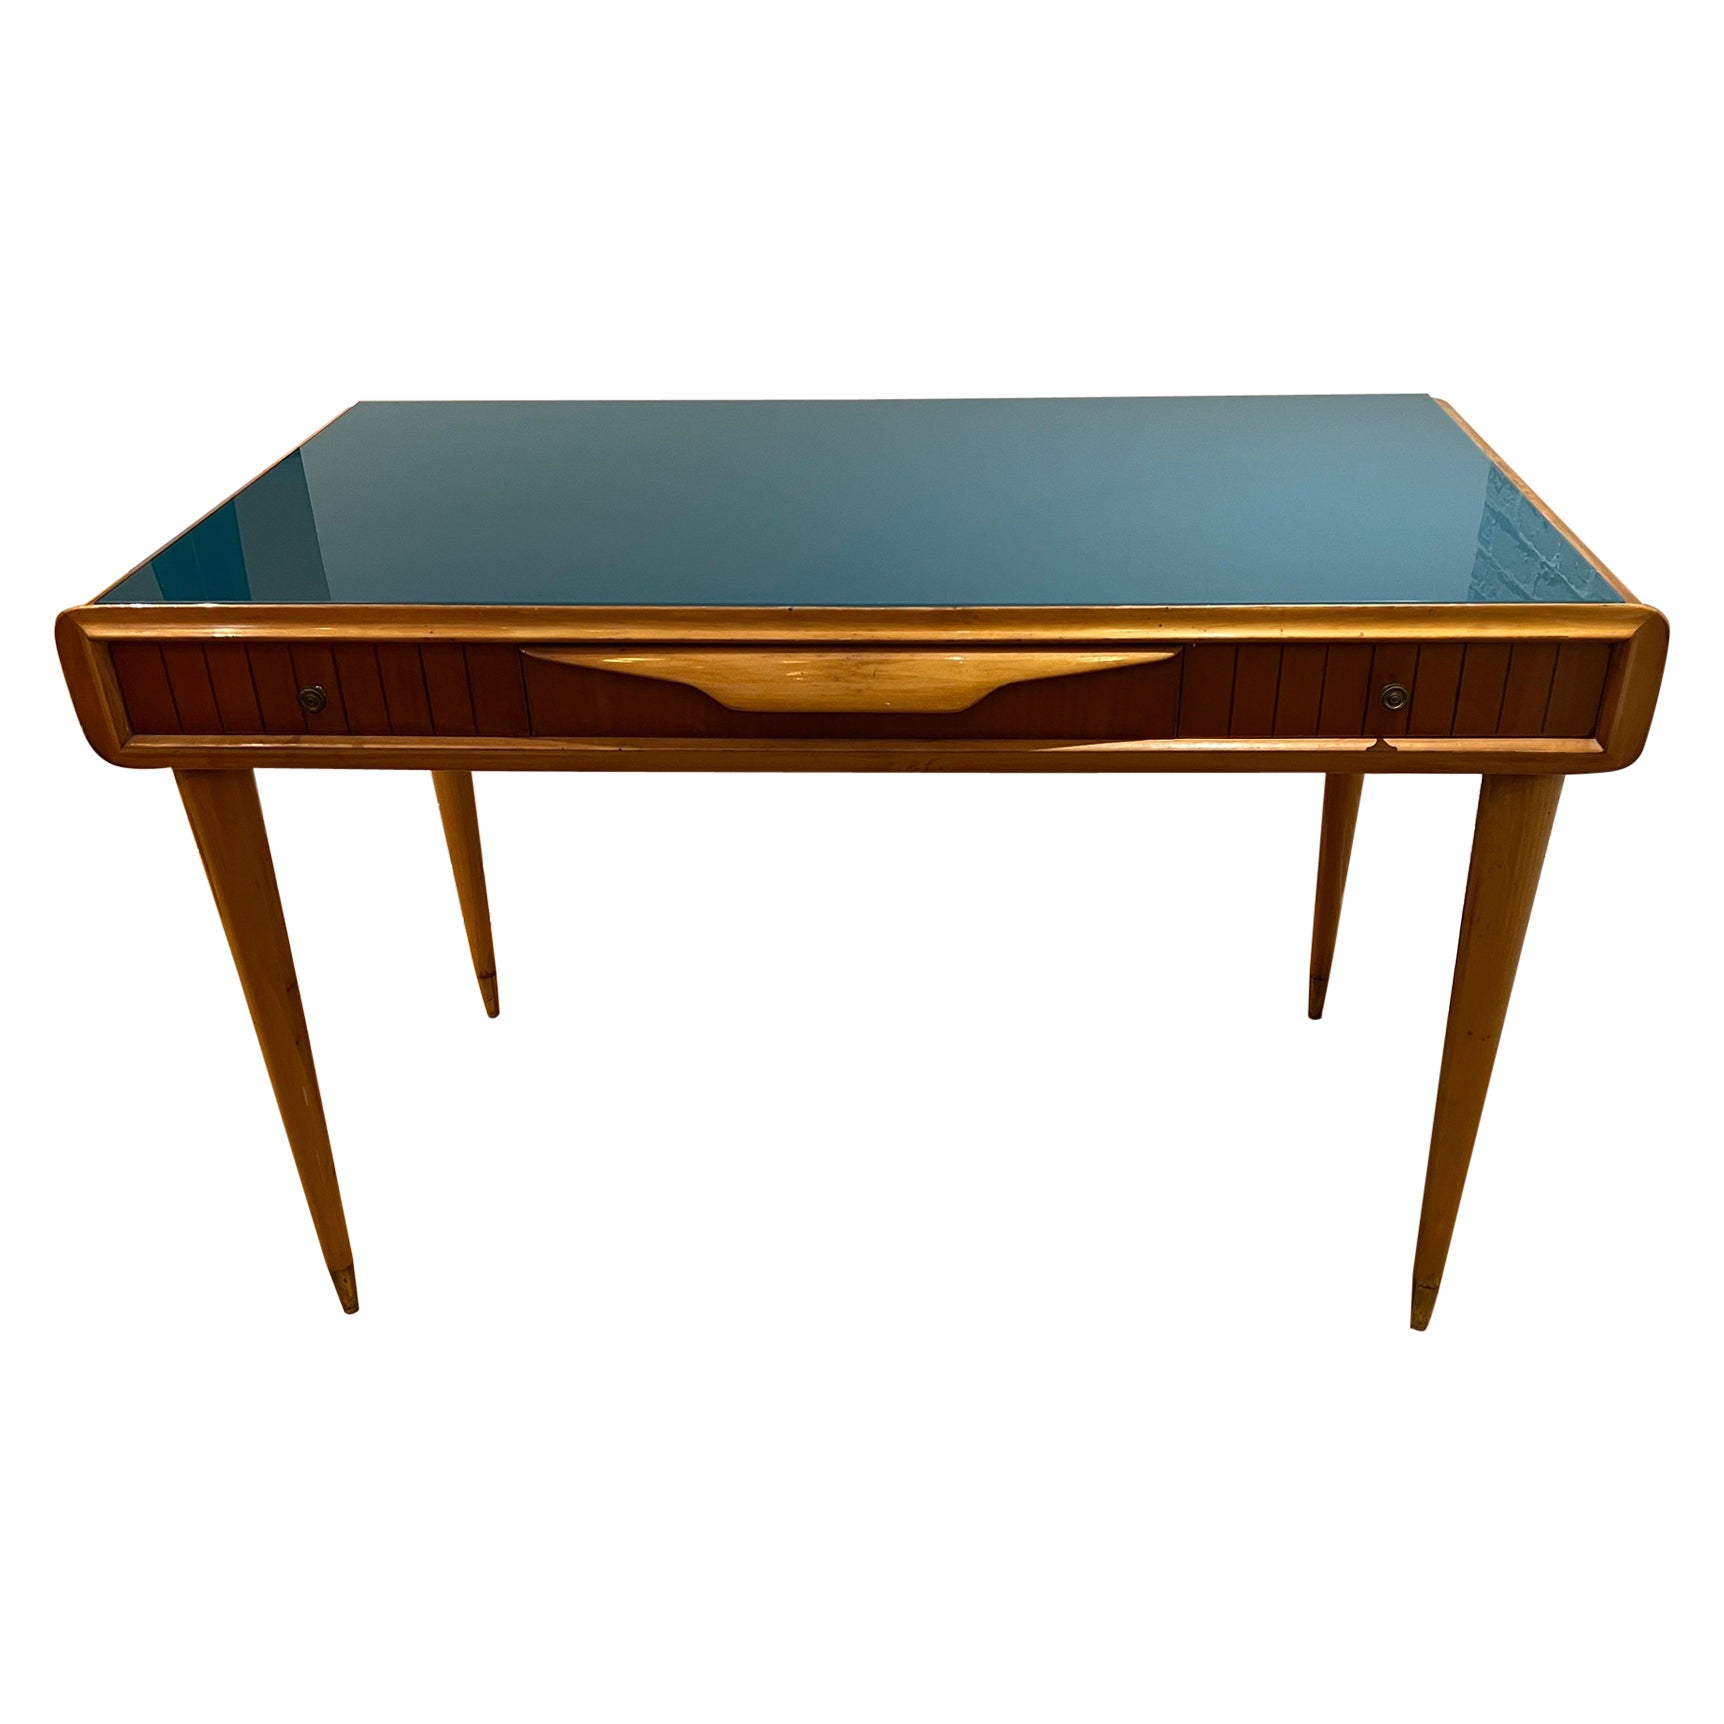 Small desk/ vanity table with blue glass top 